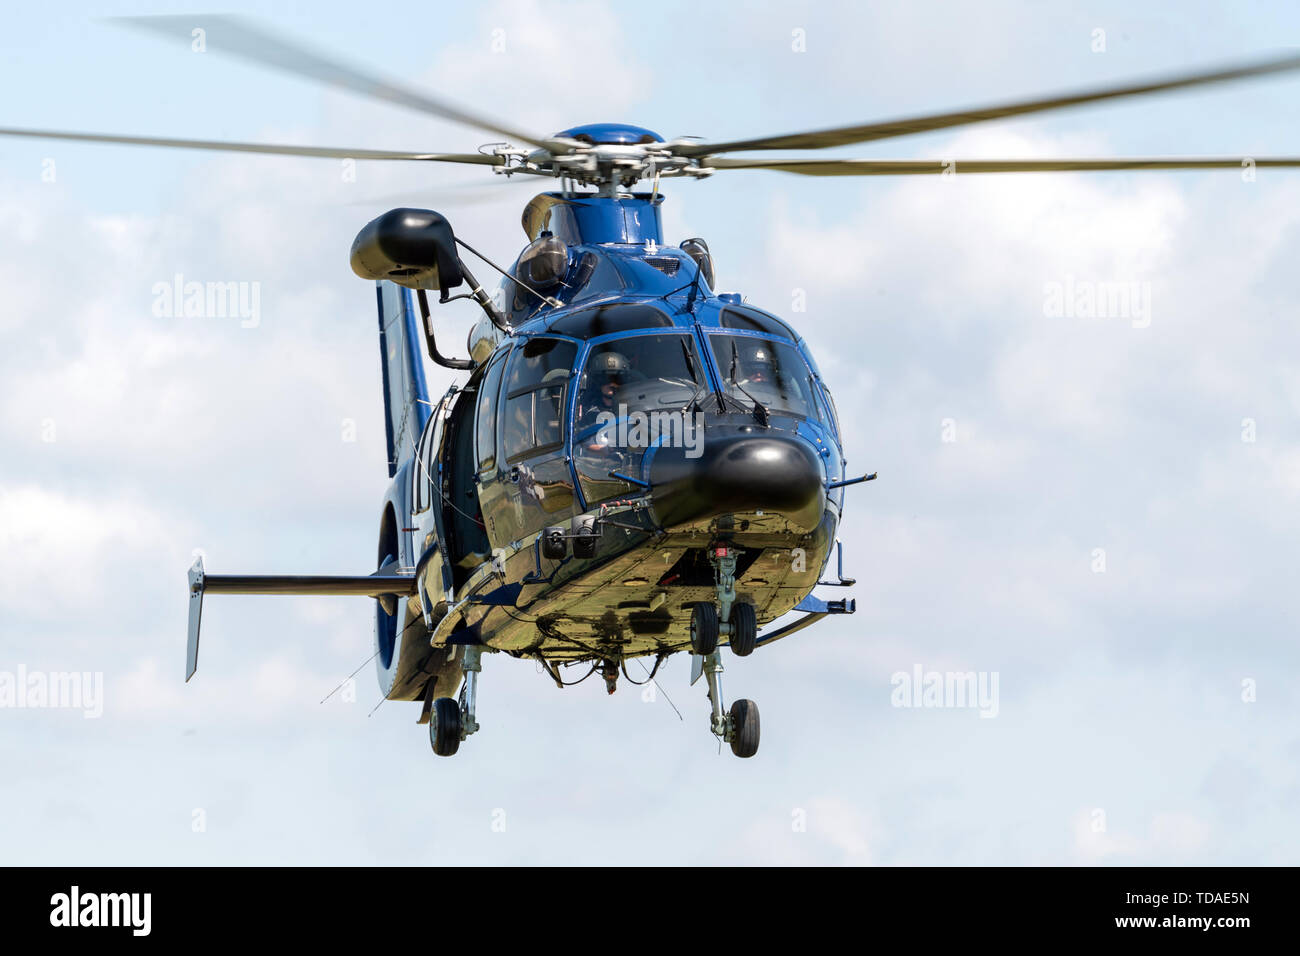 13 June 2019, Saxony, Nünchritz: An EC 155 b1 helicopter flies in the sky from the Elbe during a helicopter-assisted water rescue exercise. The Bundespolizei-Fliegerstaffel Blumberg, together with the Wasserwacht Sachsen and the Deutsche Lebens-Rettungs-Gesellschaft e.V. (German Life and Rescue Society), leads the (DLRG) is conducting a joint exercise to rescue people from flowing waters. Photo: Robert Michael/dpa-Zentralbild/ZB Stock Photo